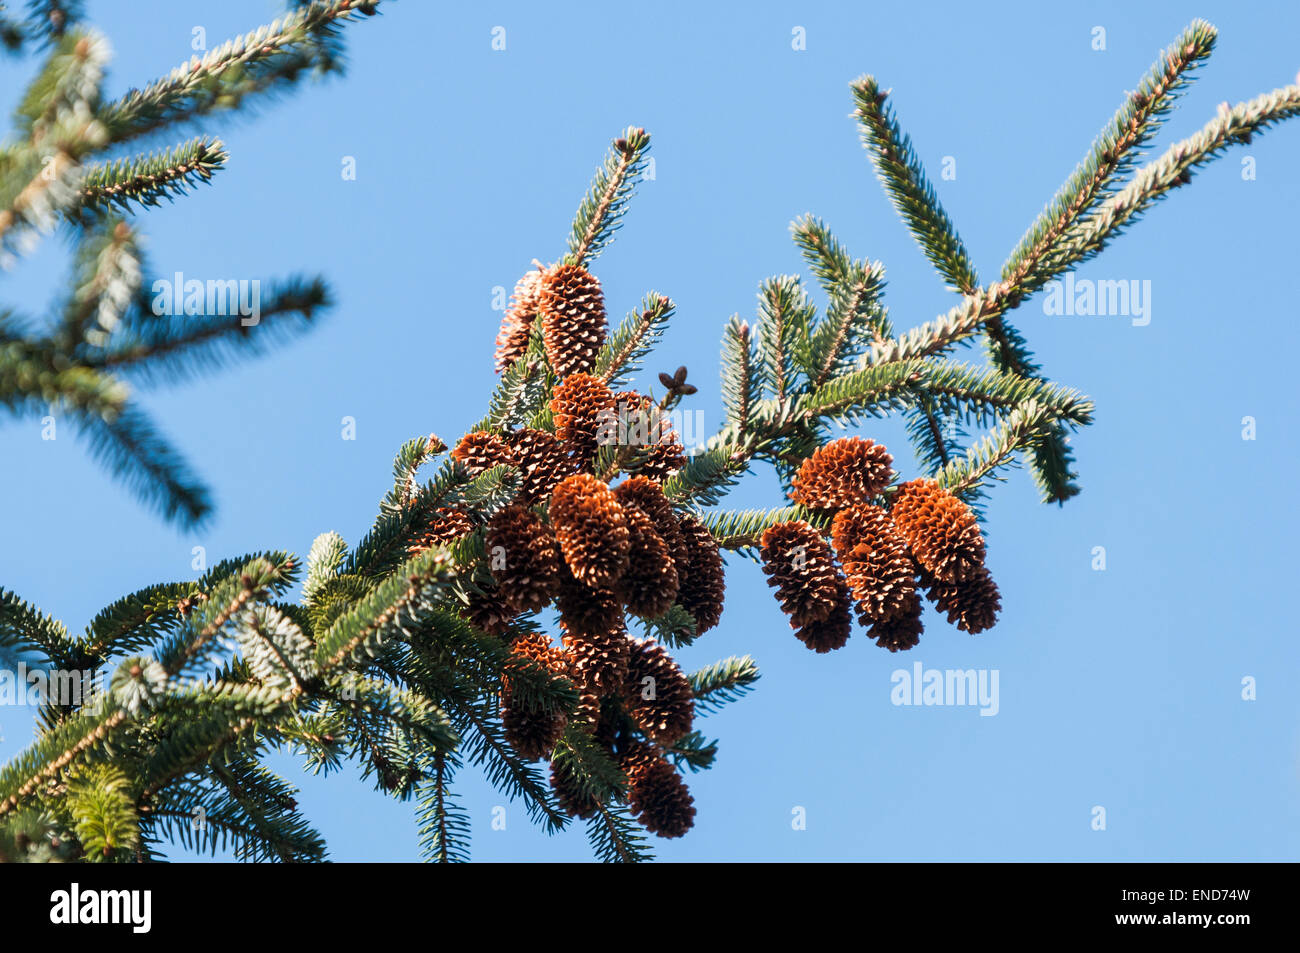 Pine cones of a young Sitka Spruce tree, Picea sitchensis, against a blue spring sky. Stock Photo